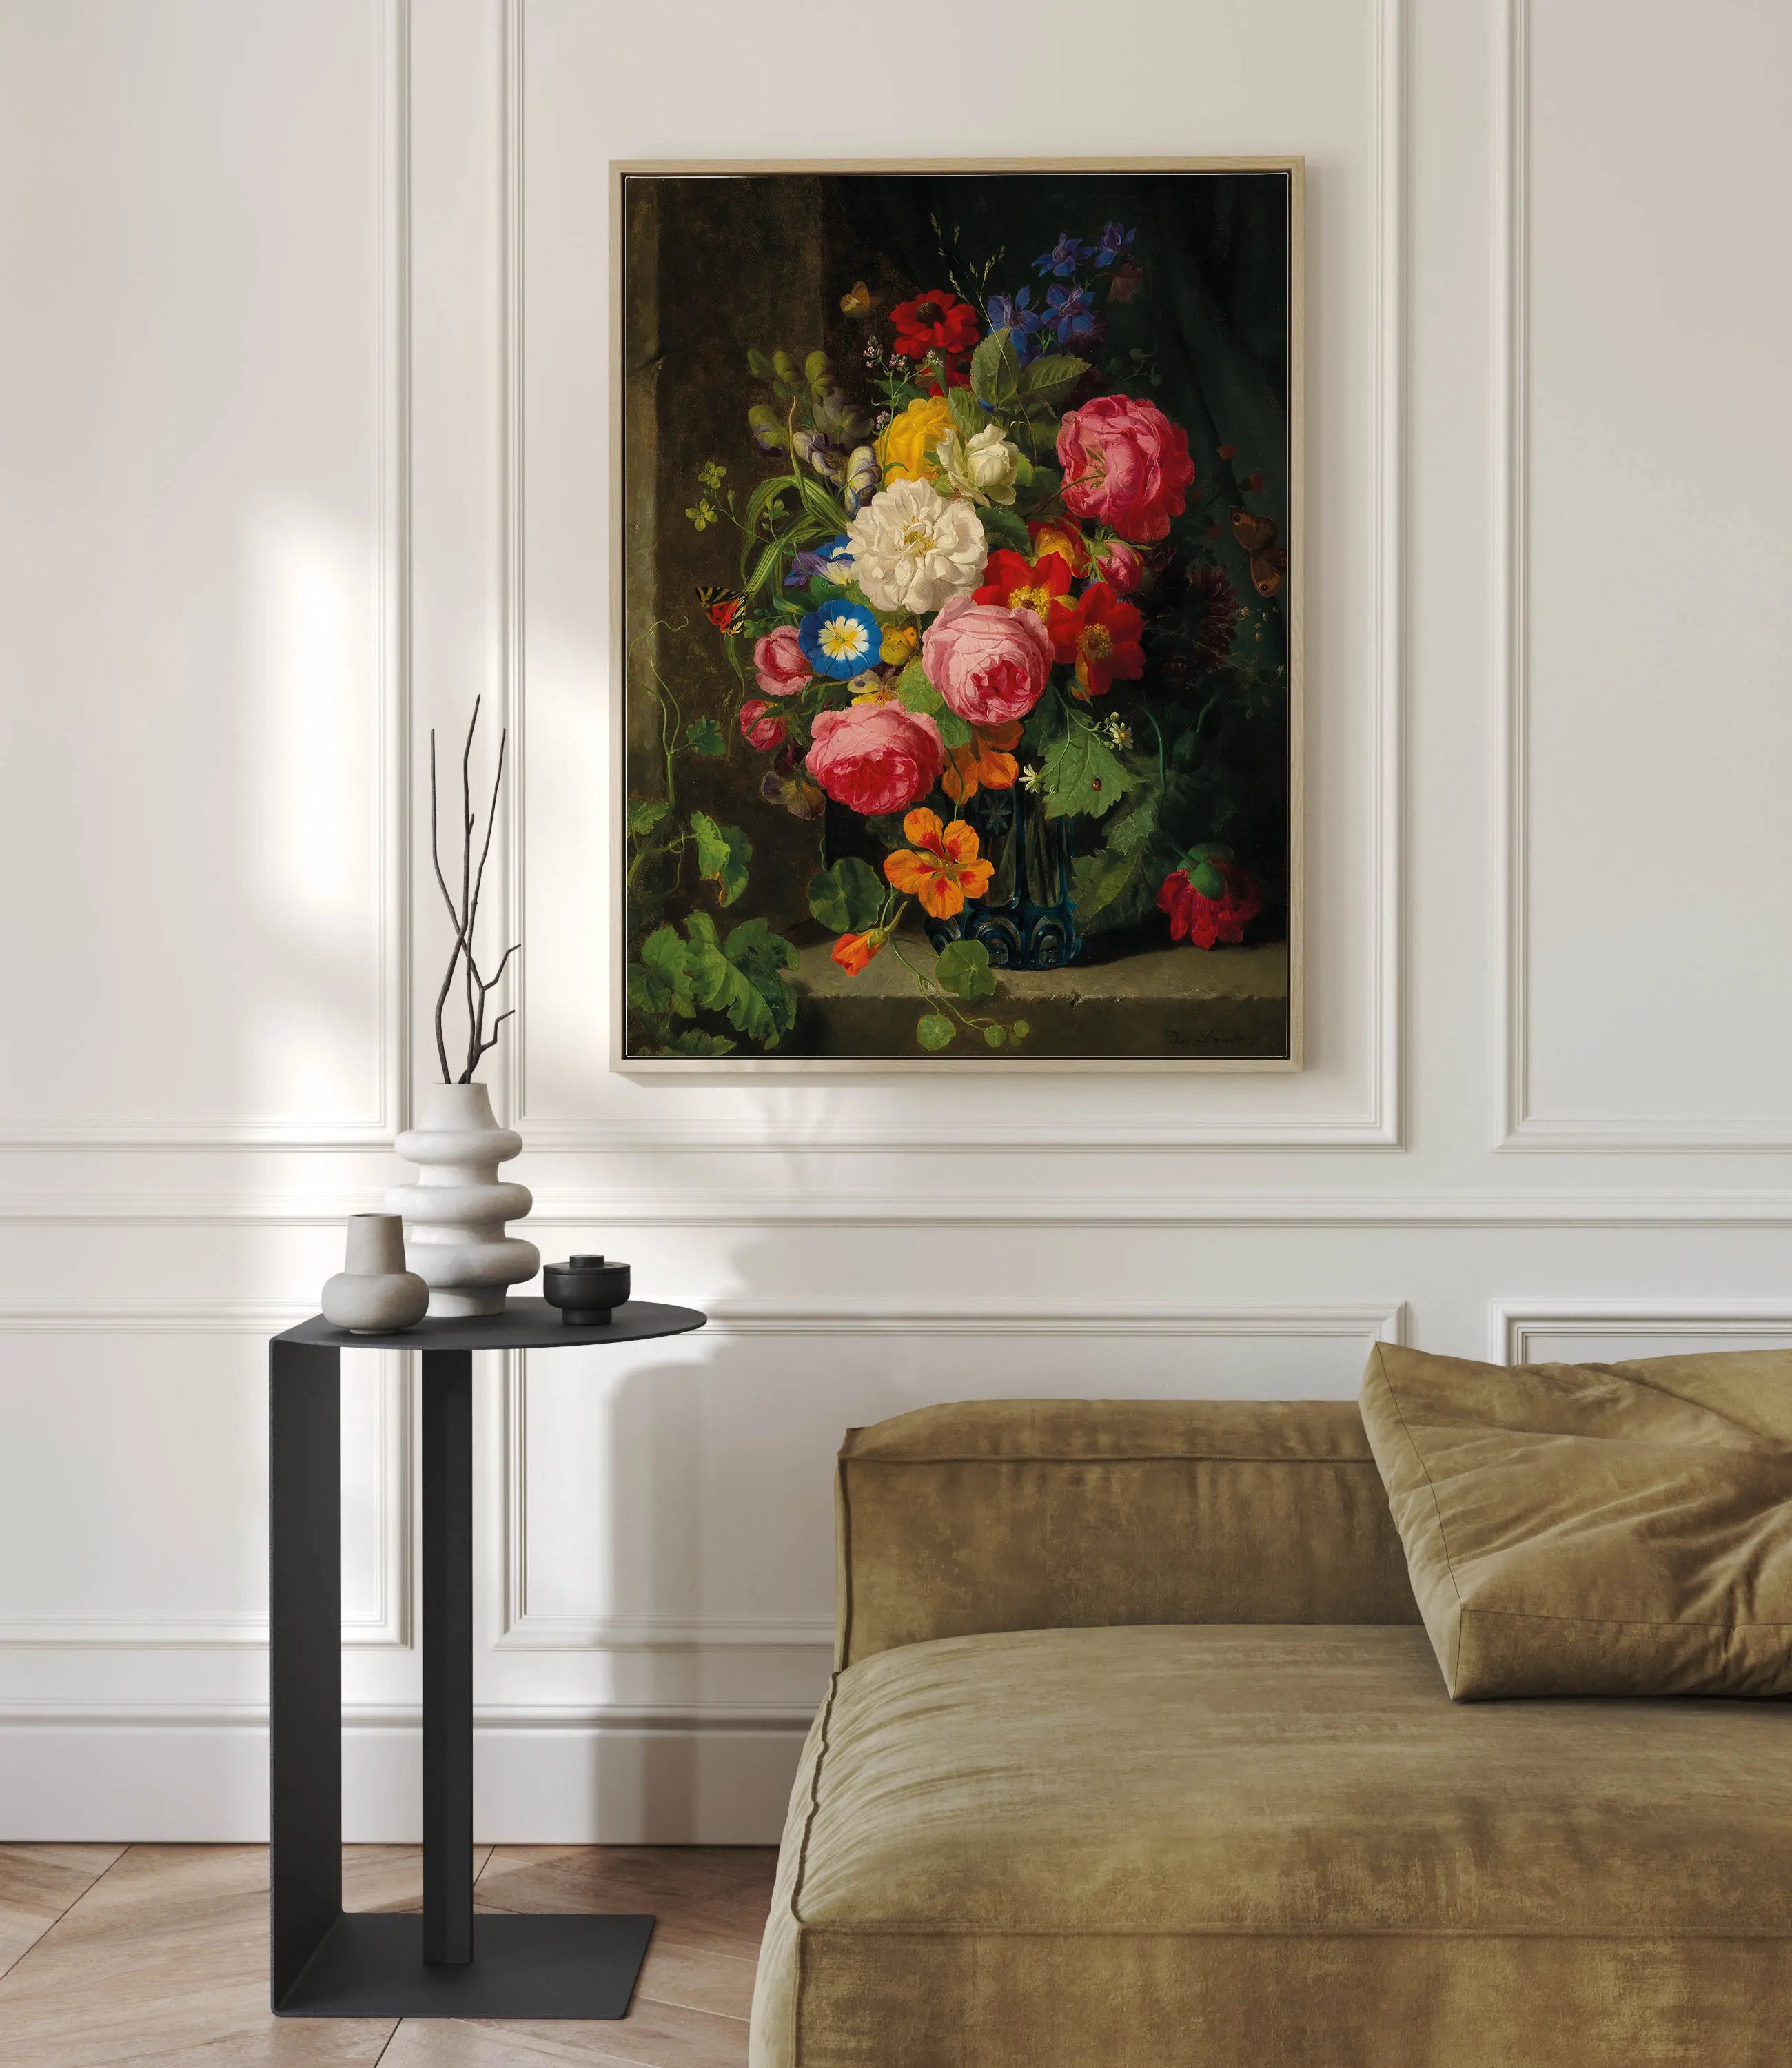 A Large Bouquet of Flowers with Roses, Nasturtium and Butterflies by Josef Lauer